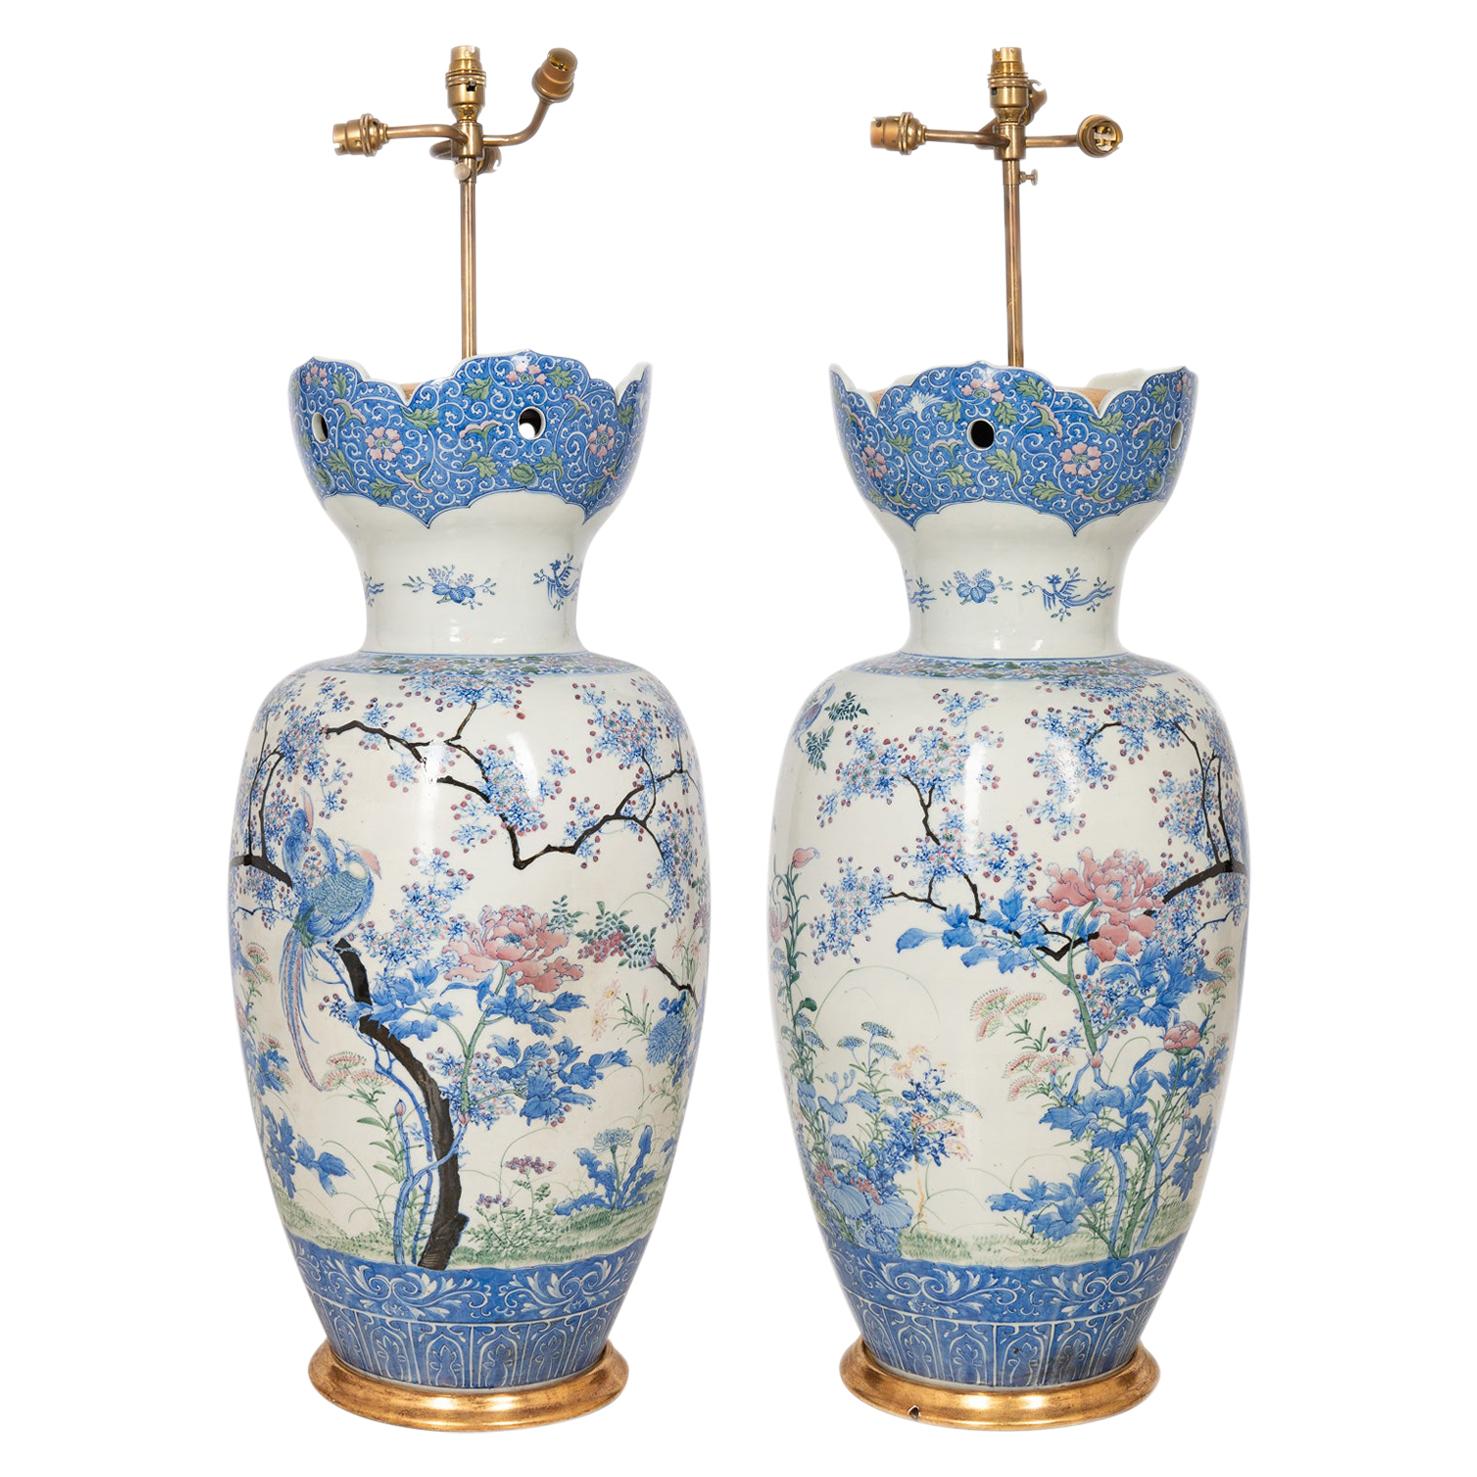 A large good quality pair of early 20th century Japanese Yokohama vases / lamps, each with flared necks, with pierced petal shaping, white ground, blue boarders with classical motif decoration. Wonderful exotic flowers, birds and blossom trees,